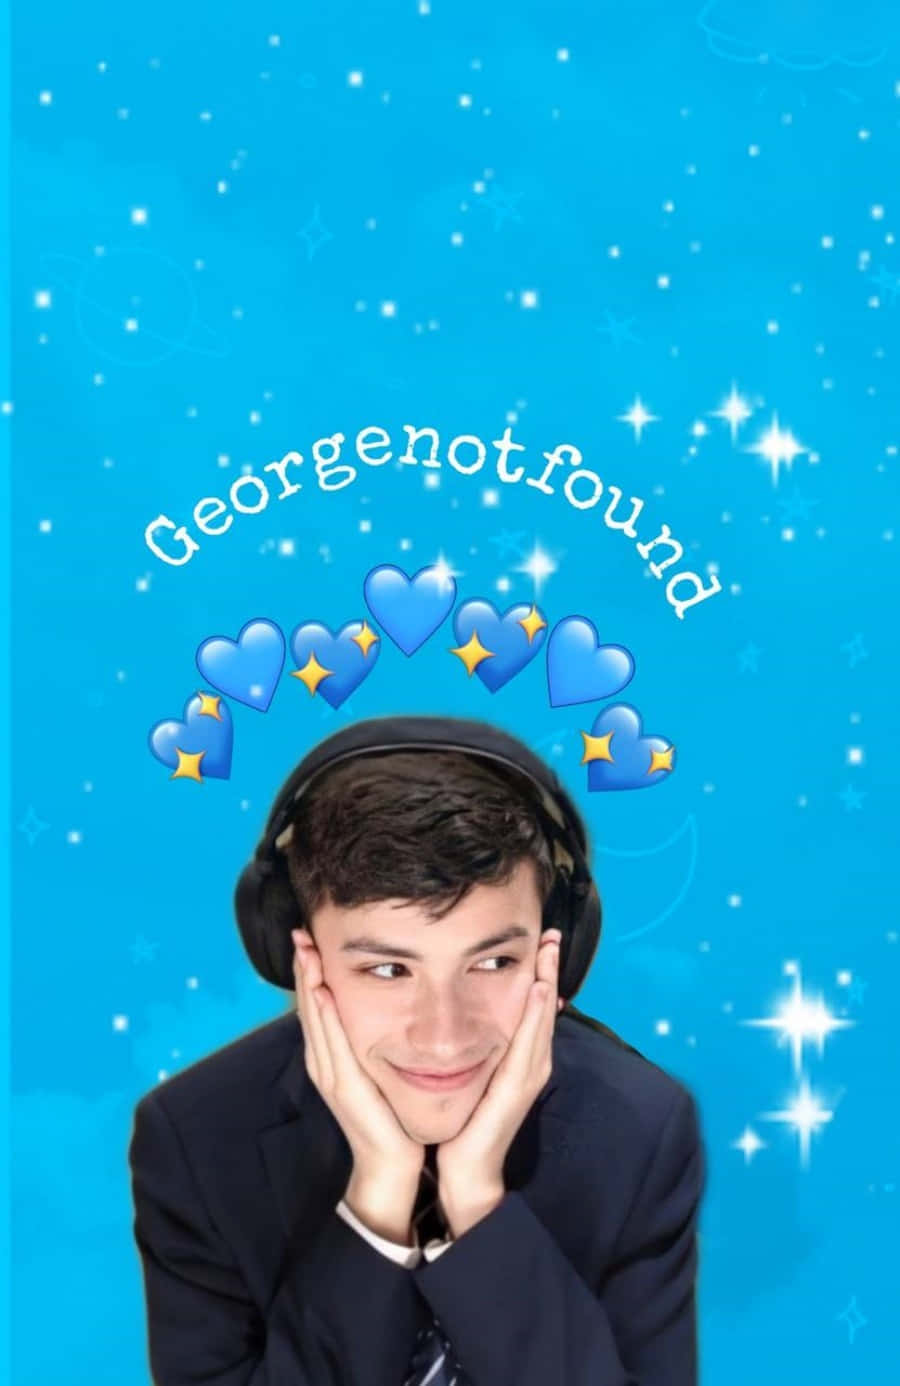 Georgenotfound With Blue Hearts Background